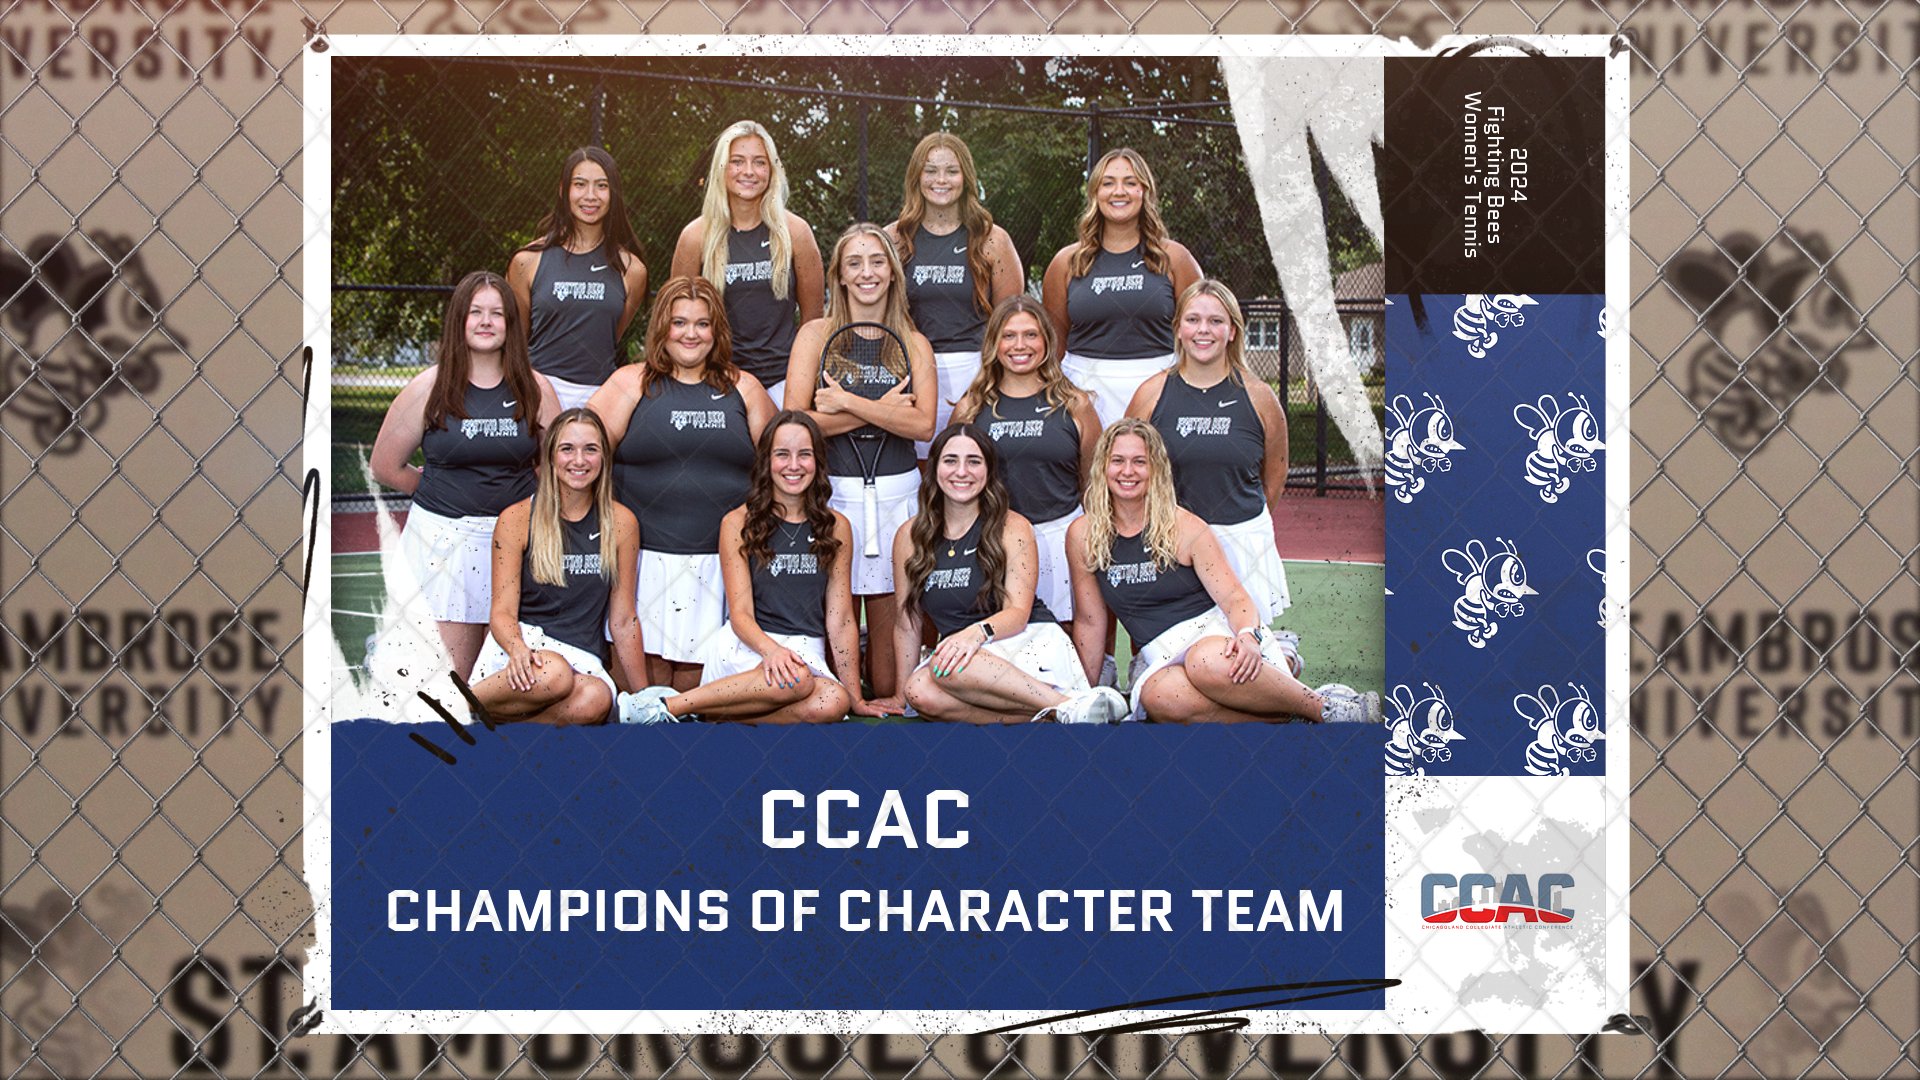 Bees named CCAC Champions of Character Team